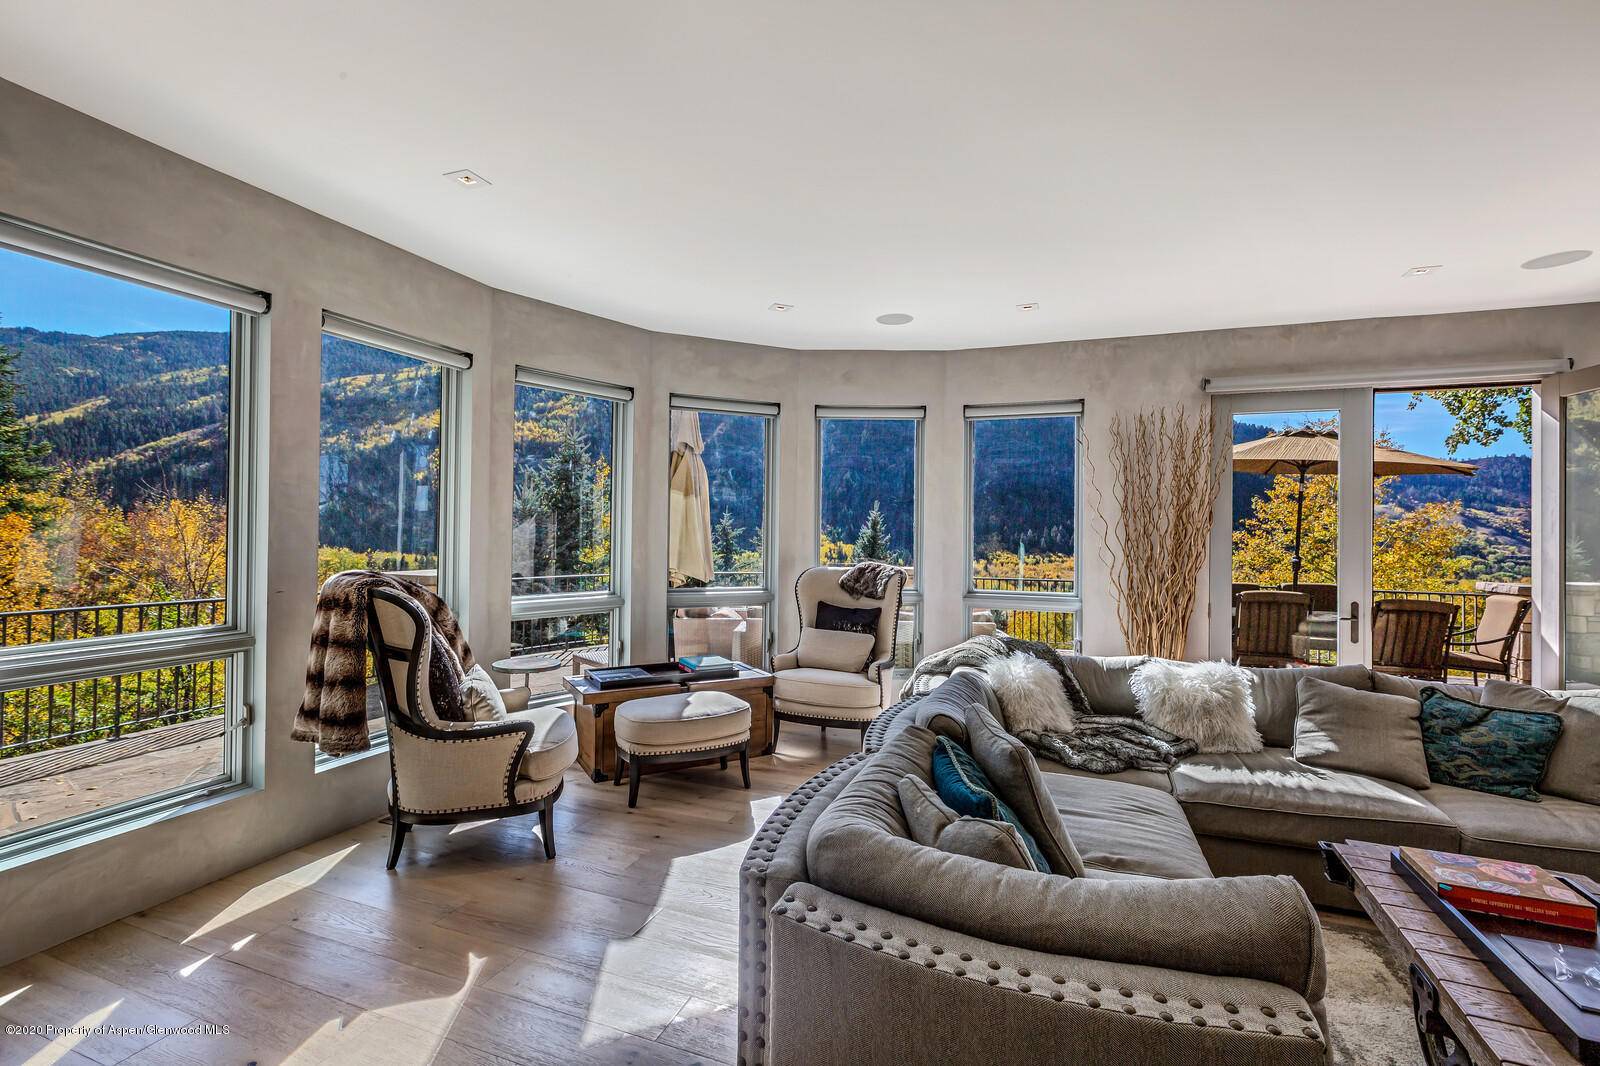 Nestled in a serene aspen grove and surrounded by mature evergreens, this luxurious private mountain estate has spectacular panoramic views spanning across the Roaring Fork Valley with awe inspiring sunsets.